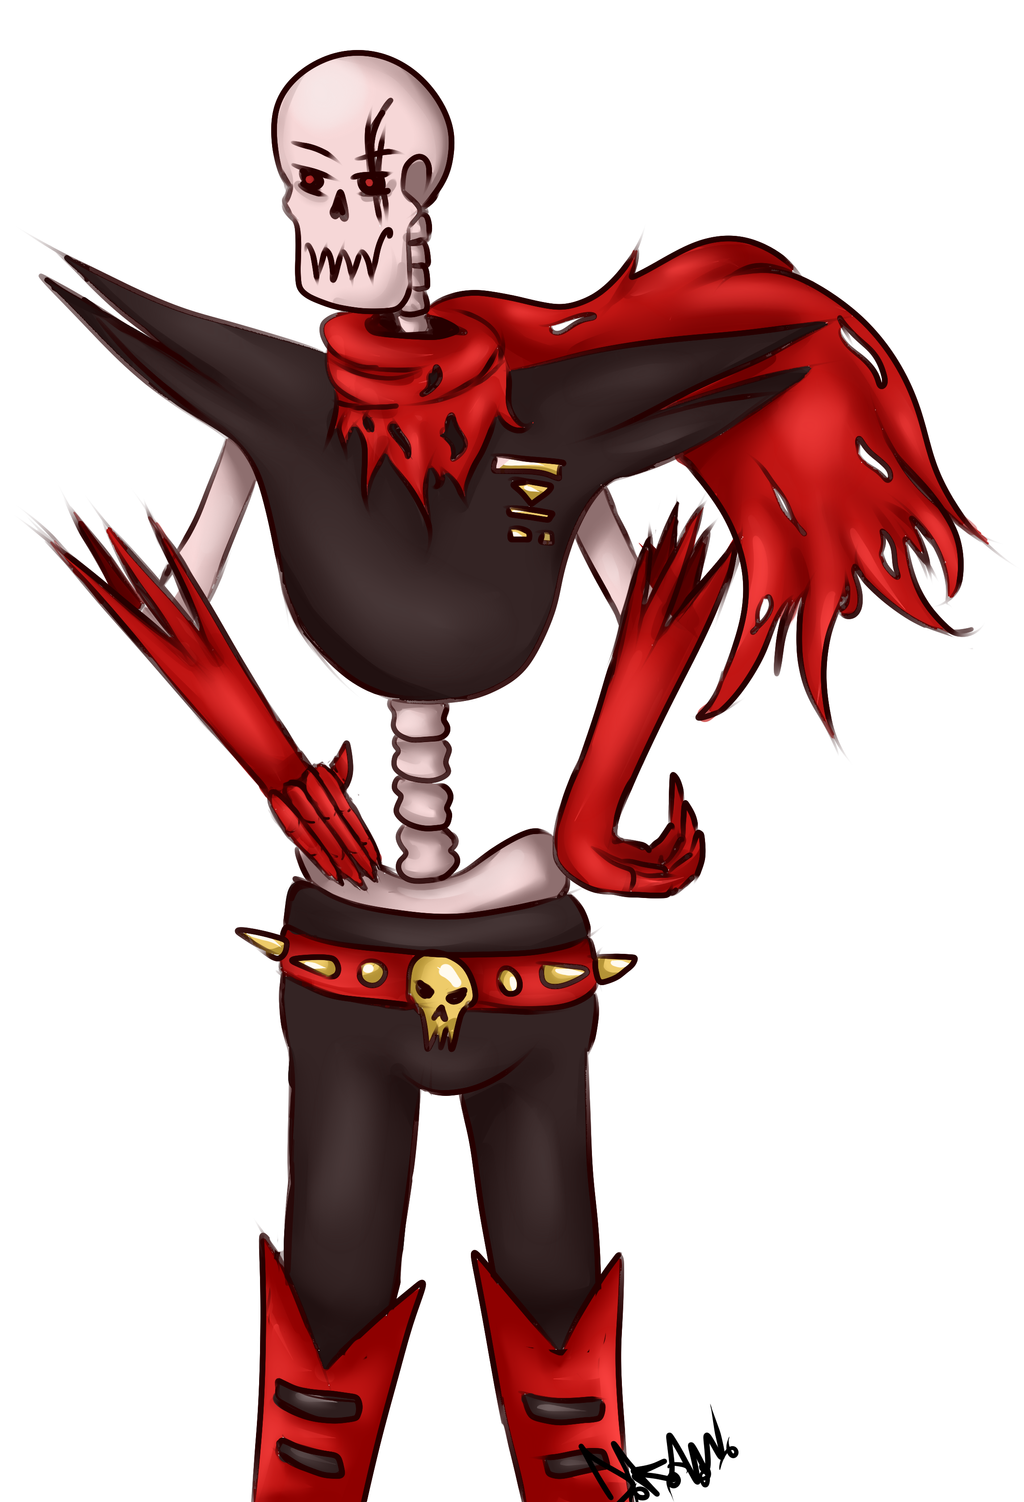 Underfell Papyrus by HowlingWolfBlood75 on DeviantArt